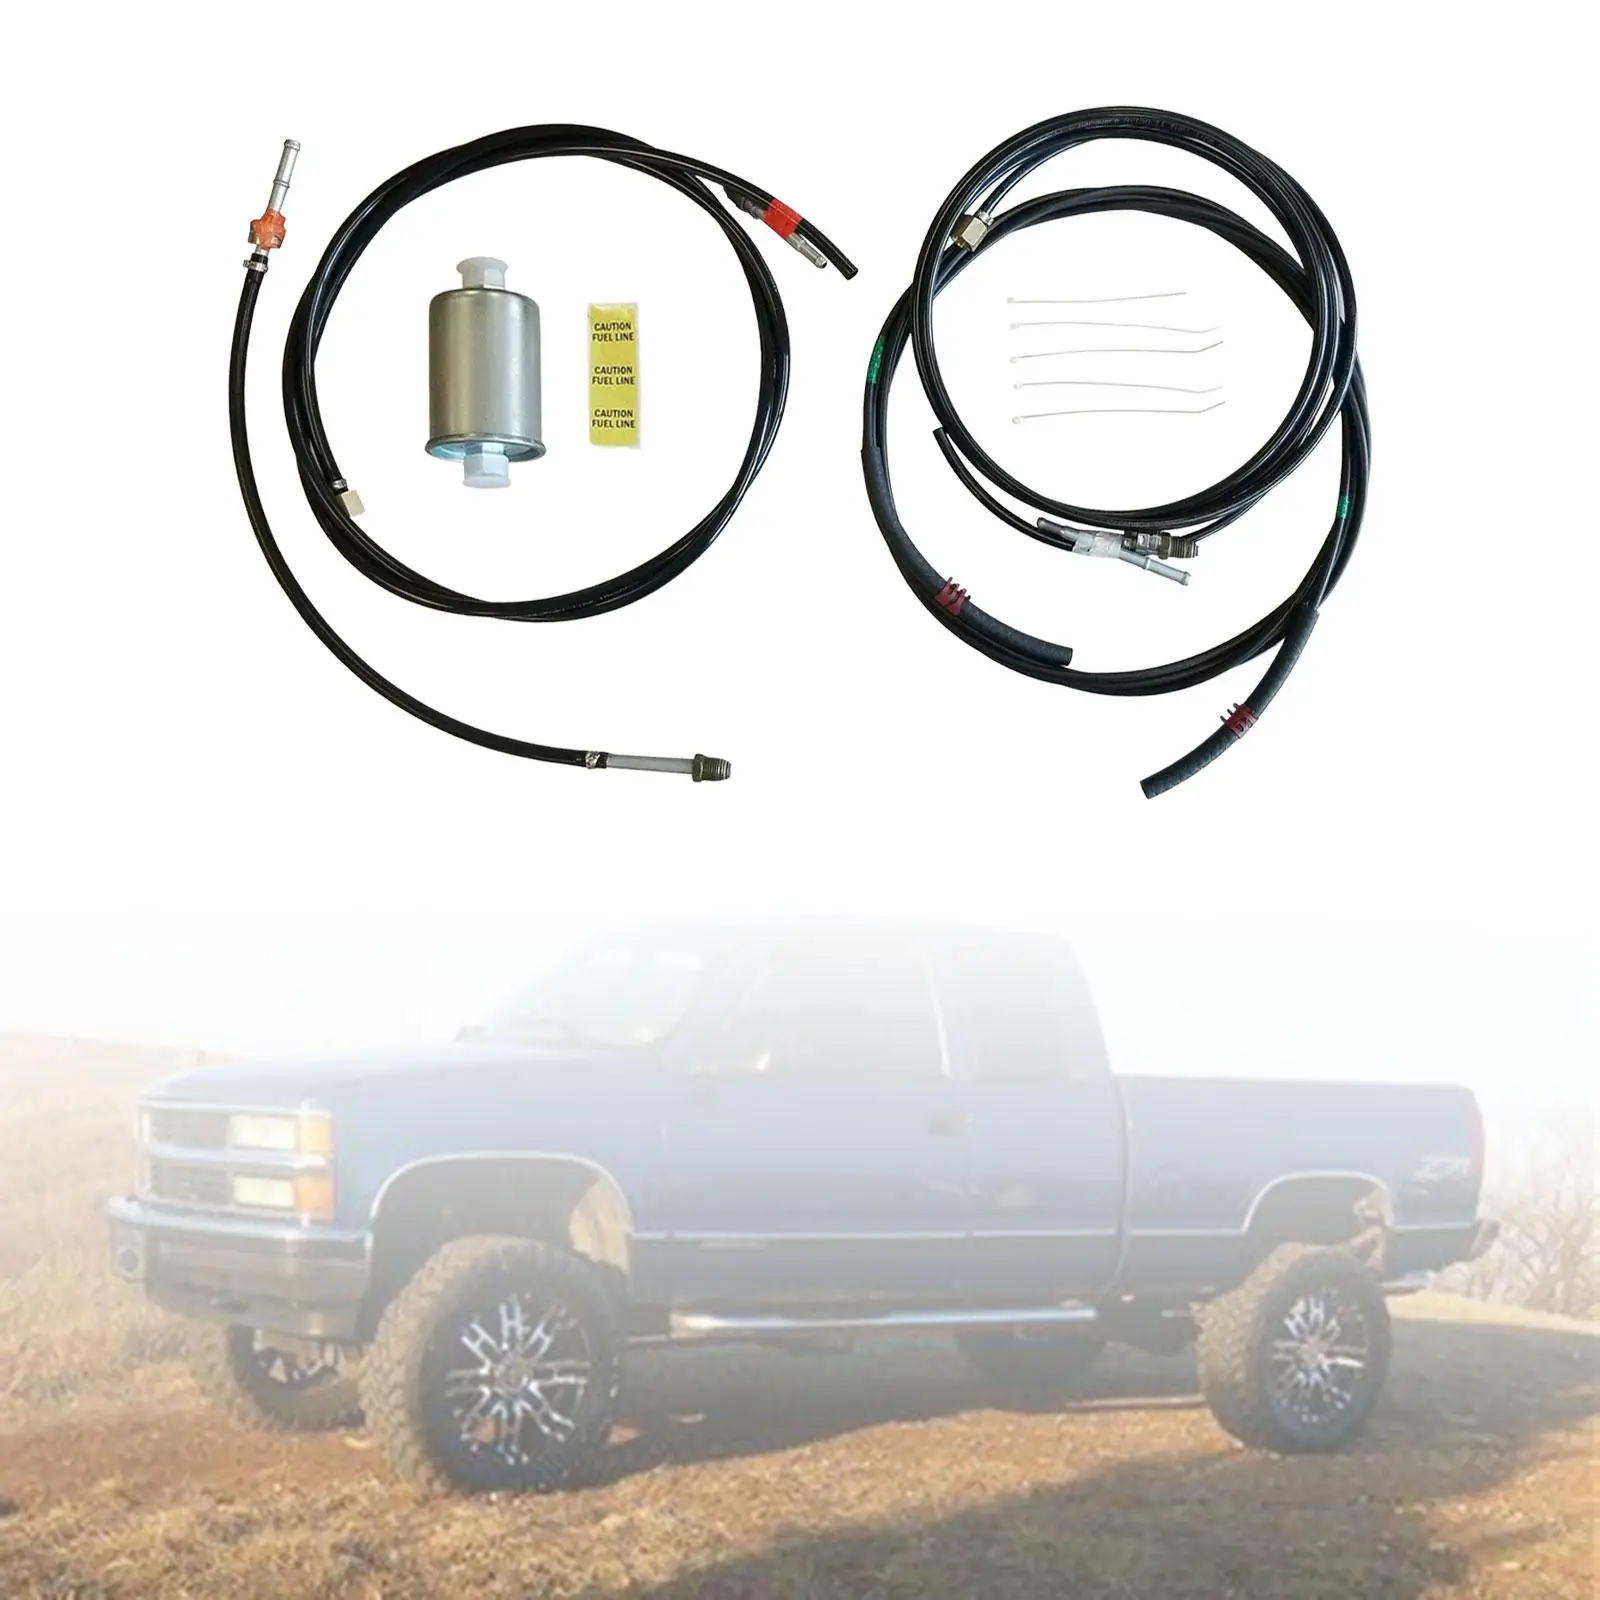 Fuel Lines Assembly Nfr0013 Professional Repair Parts Durable Replacement Accessories for GMC 1988-1997 Long Service Life